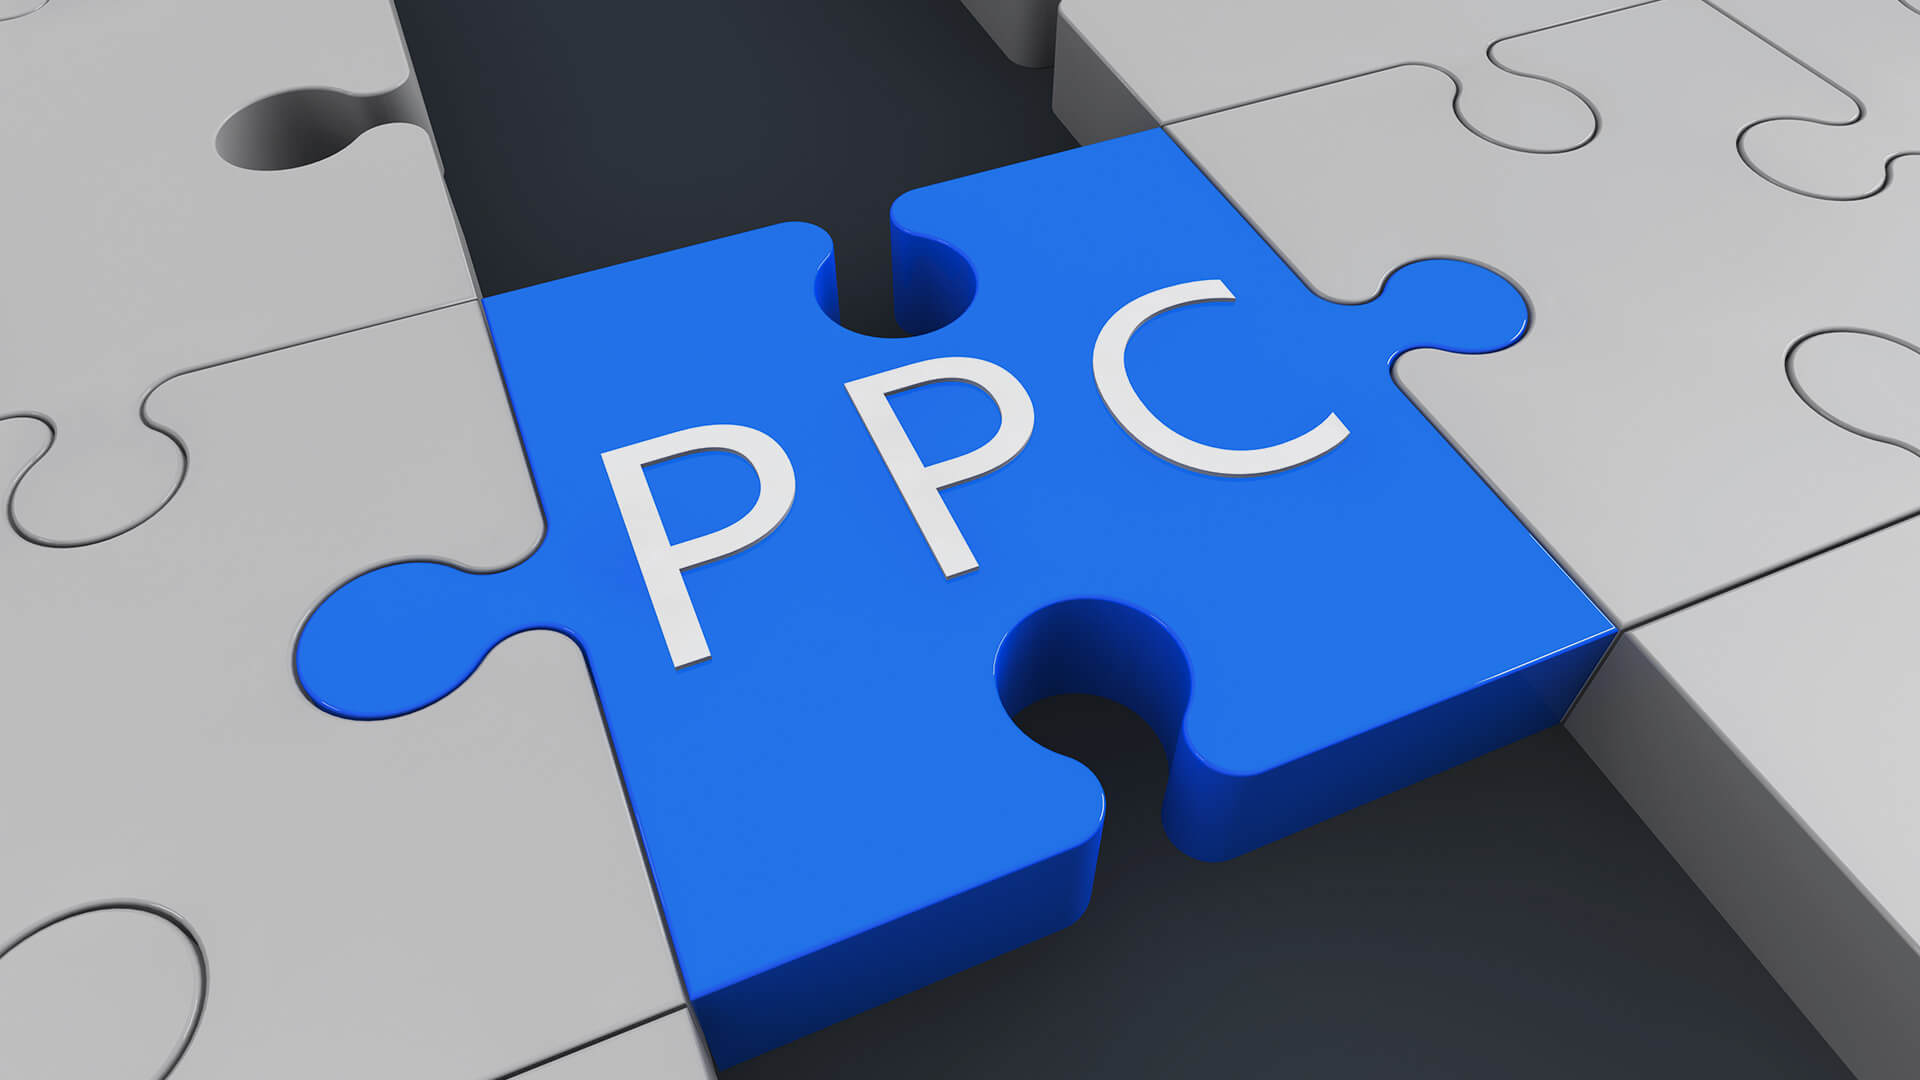 SEO Or PPC: Pros And Cons